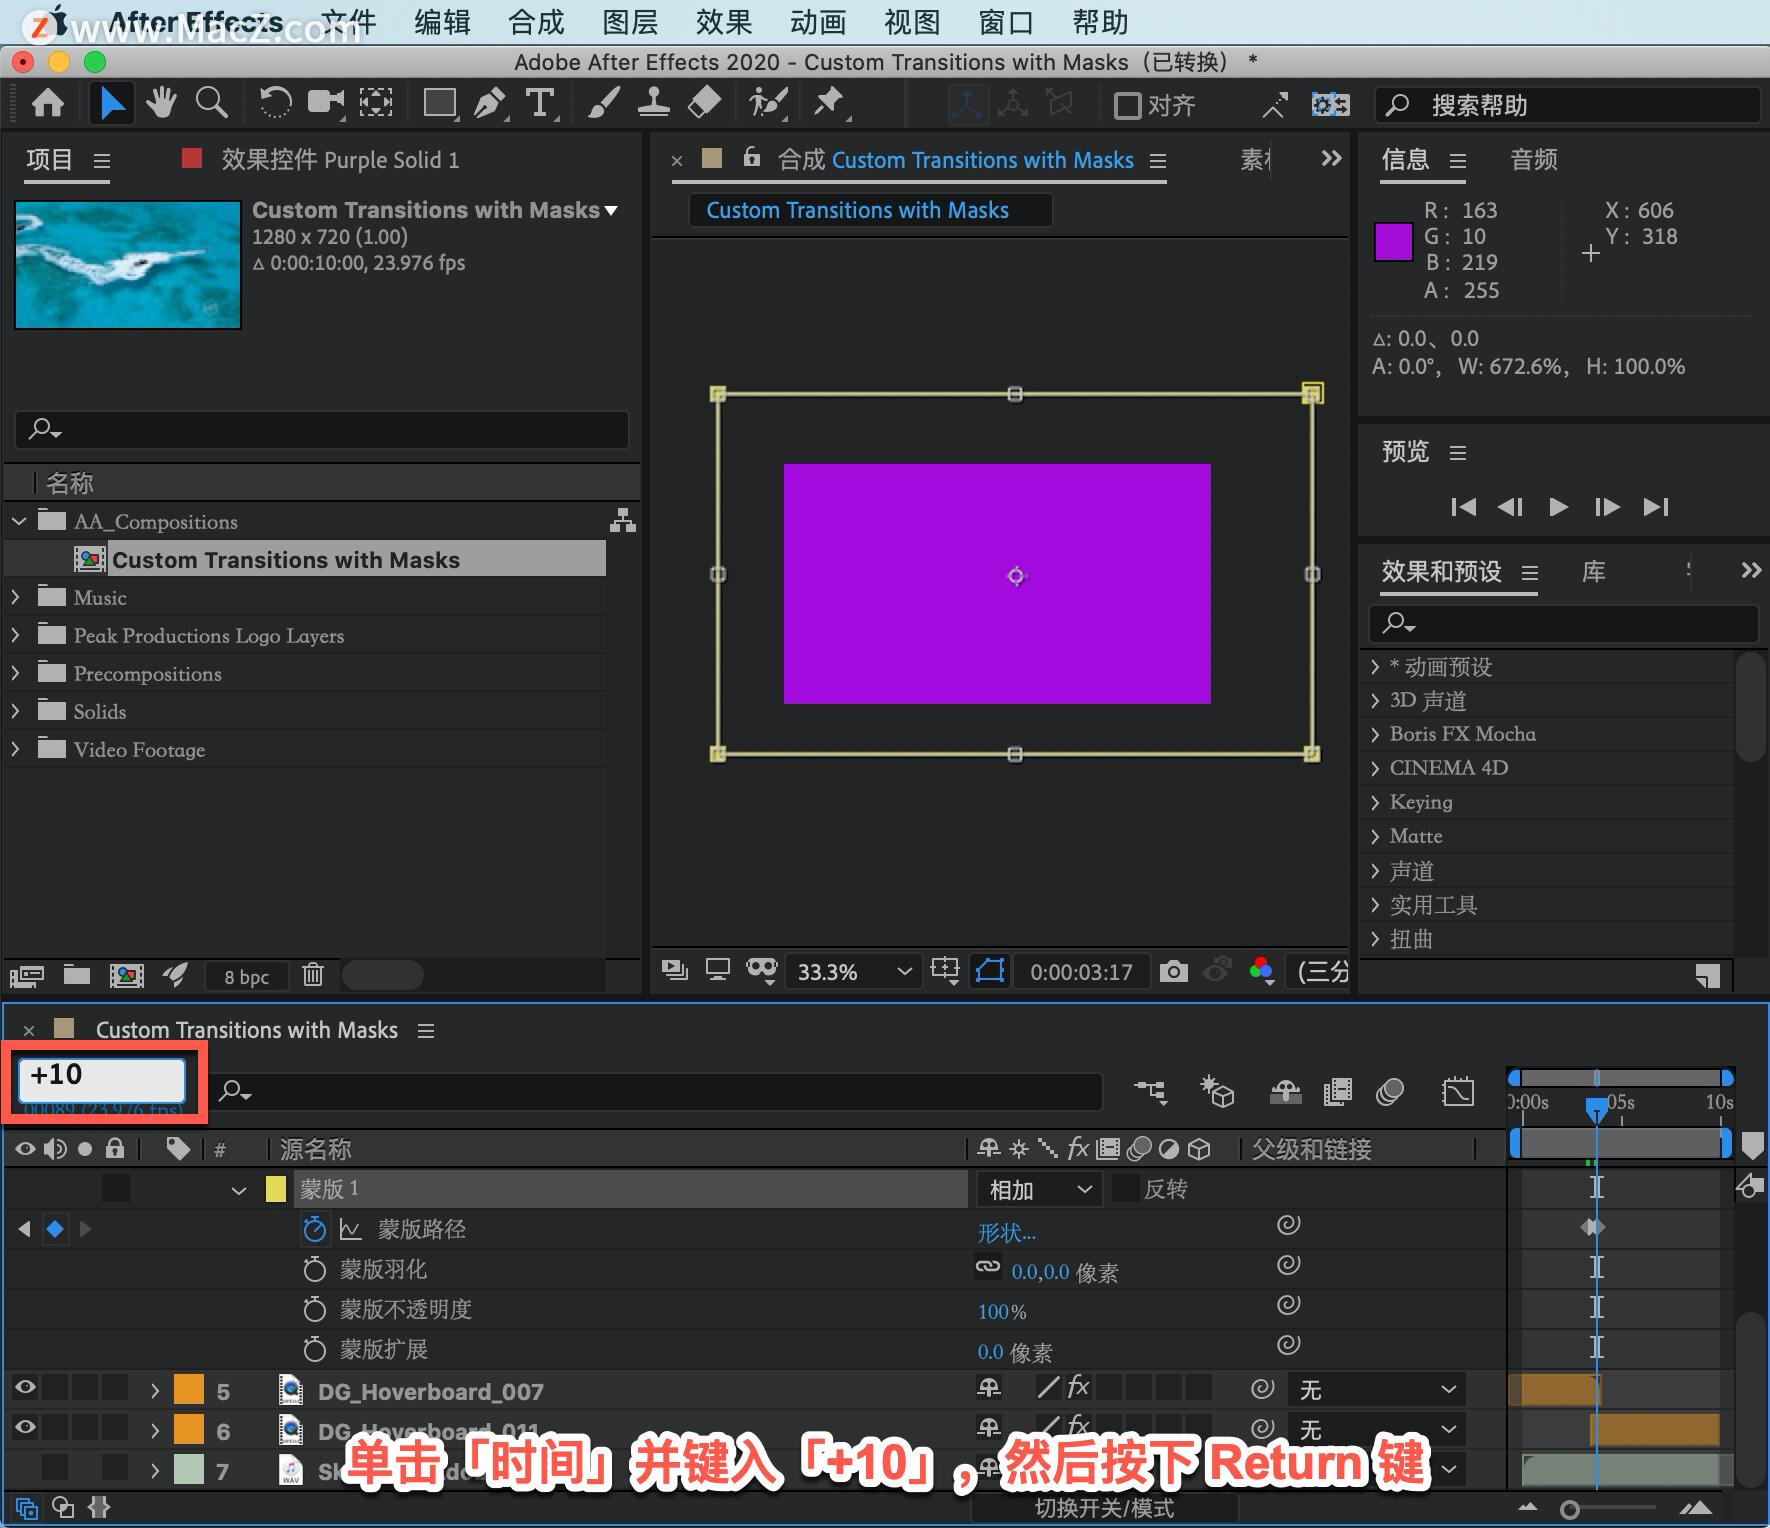 After Effects 教程「25」，如何在 After Effects 中对蒙版进行动画绘制？